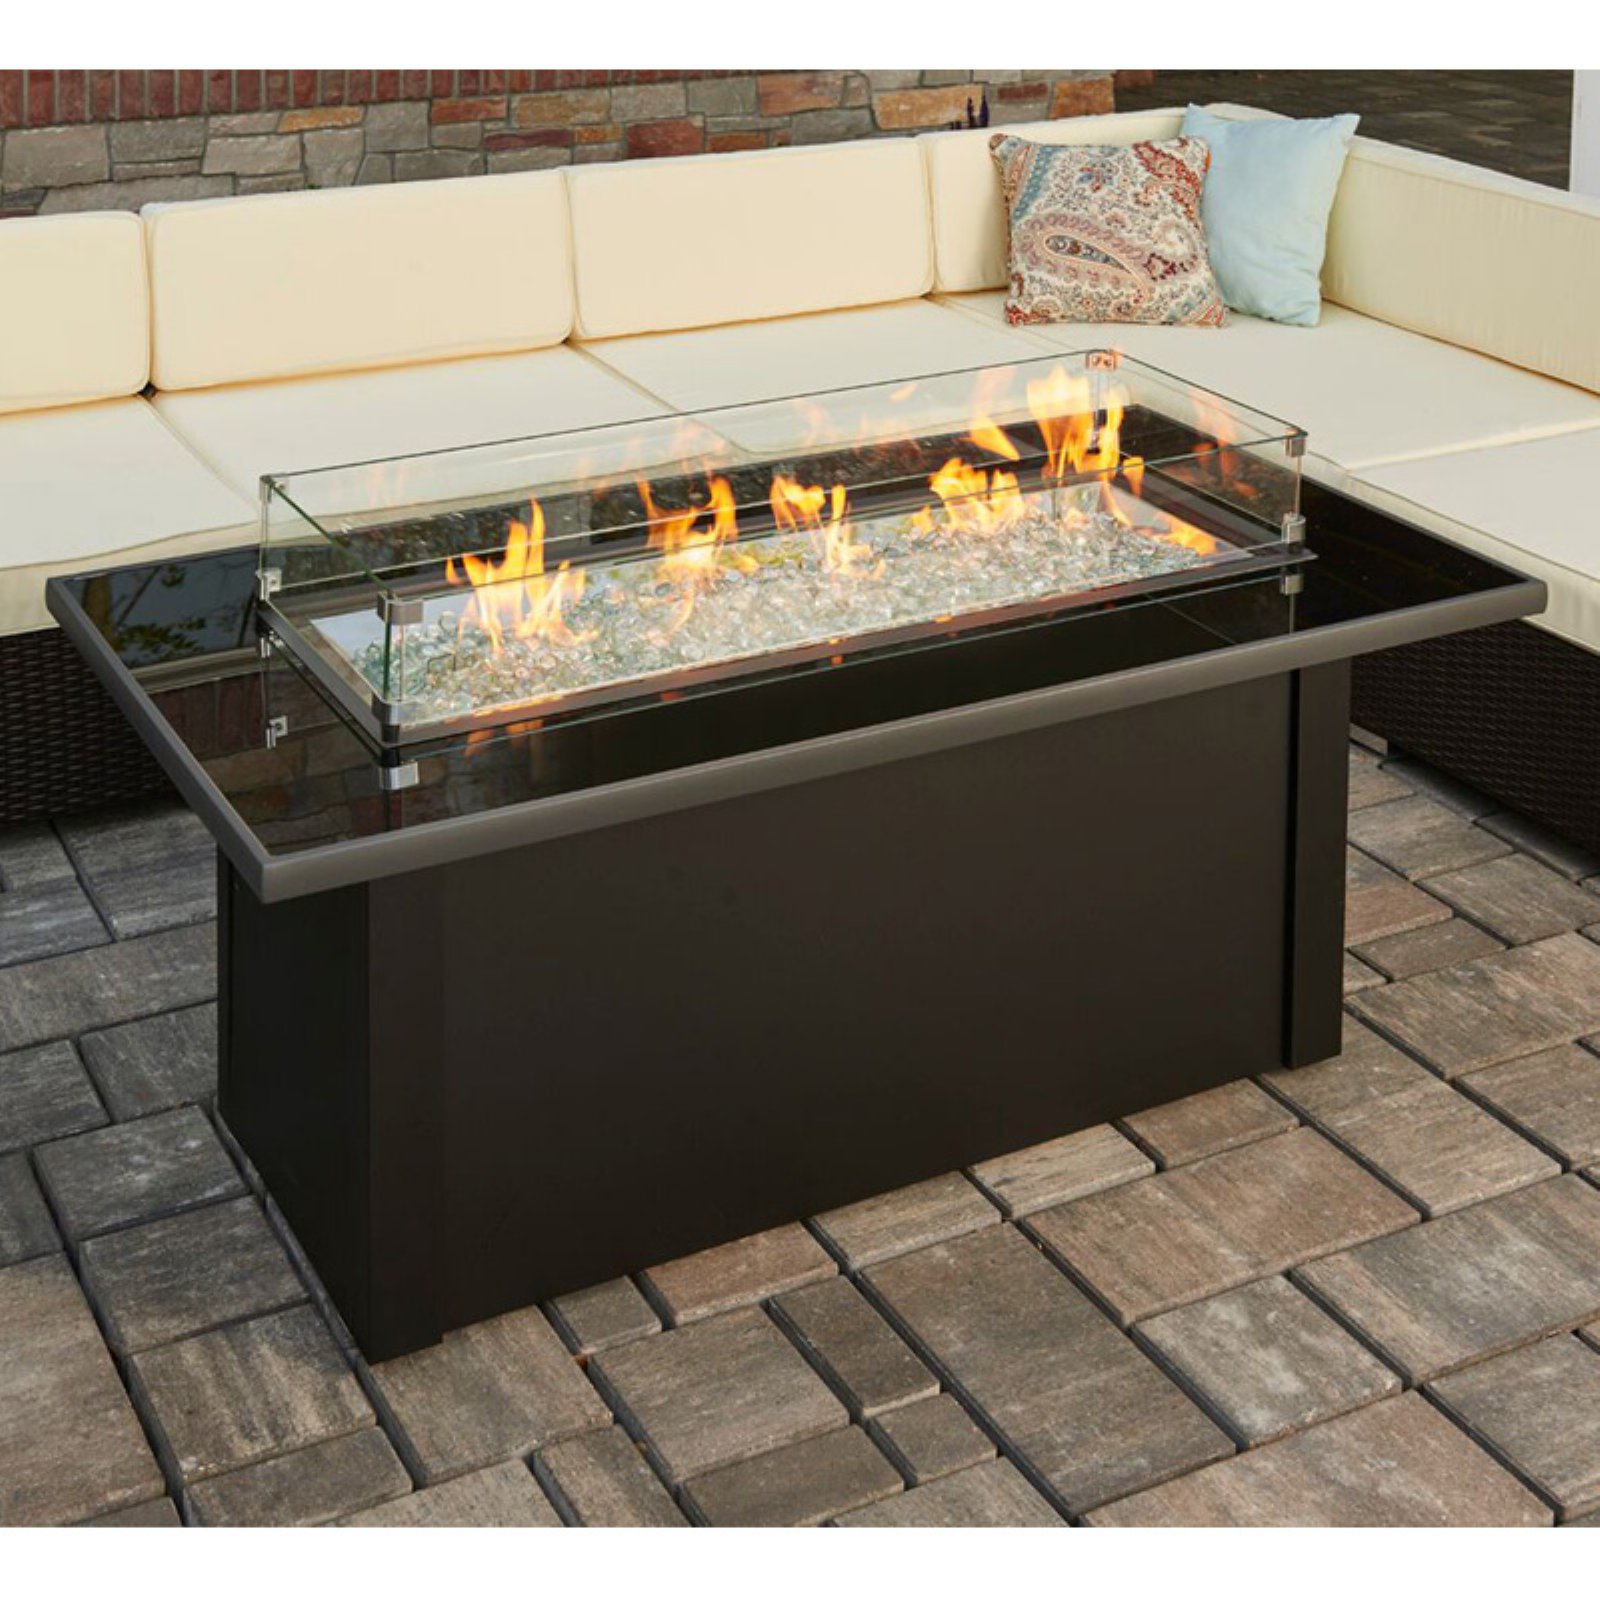 Fireplace Spark Guard Elegant Outdoor Greatroom Monte Carlo 59 3 In Fire Table with Free Cover